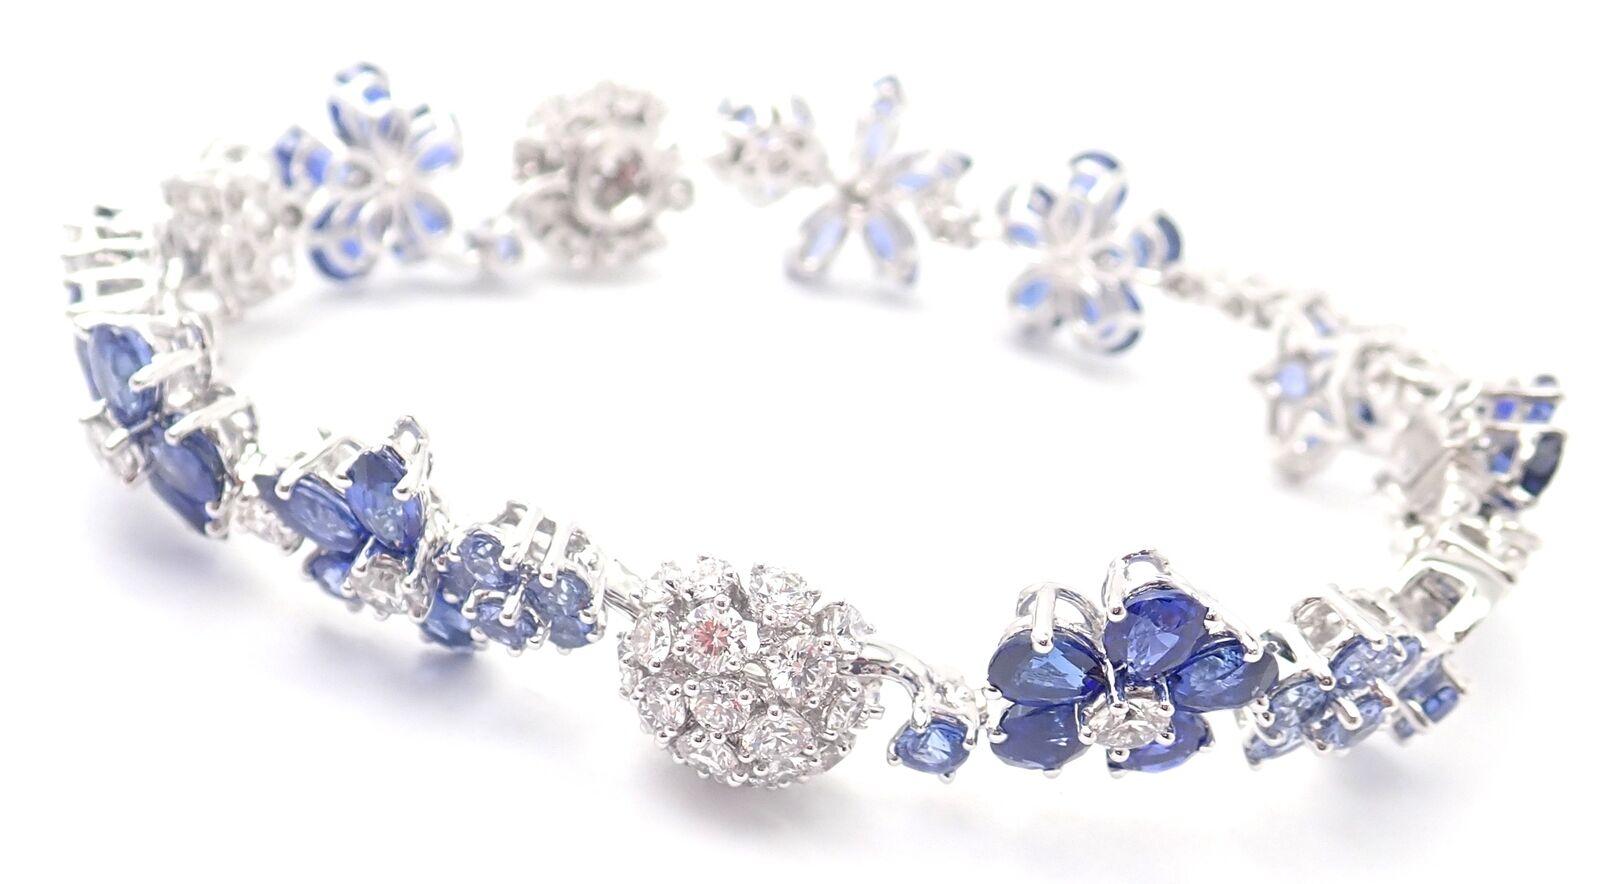 18k White Gold Diamond & Sapphire Bracelet by Van Cleef & Arpels from Folie des Pres collection.  
The Folie des Prés collection celebrates nature in a profusion of wildflowers, with colorful jewels forming delicately asymmetrical designs. 
This